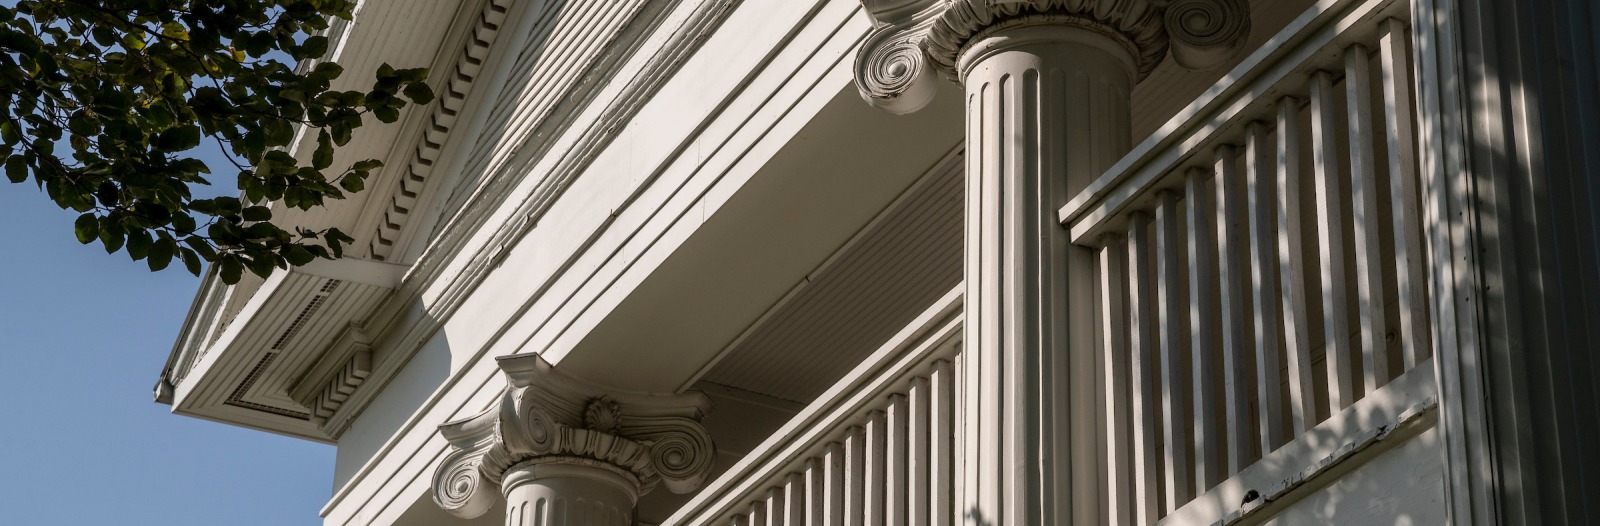 Ornamental columns and architectural details at top of an older cream-colored building with outdoor covered porch